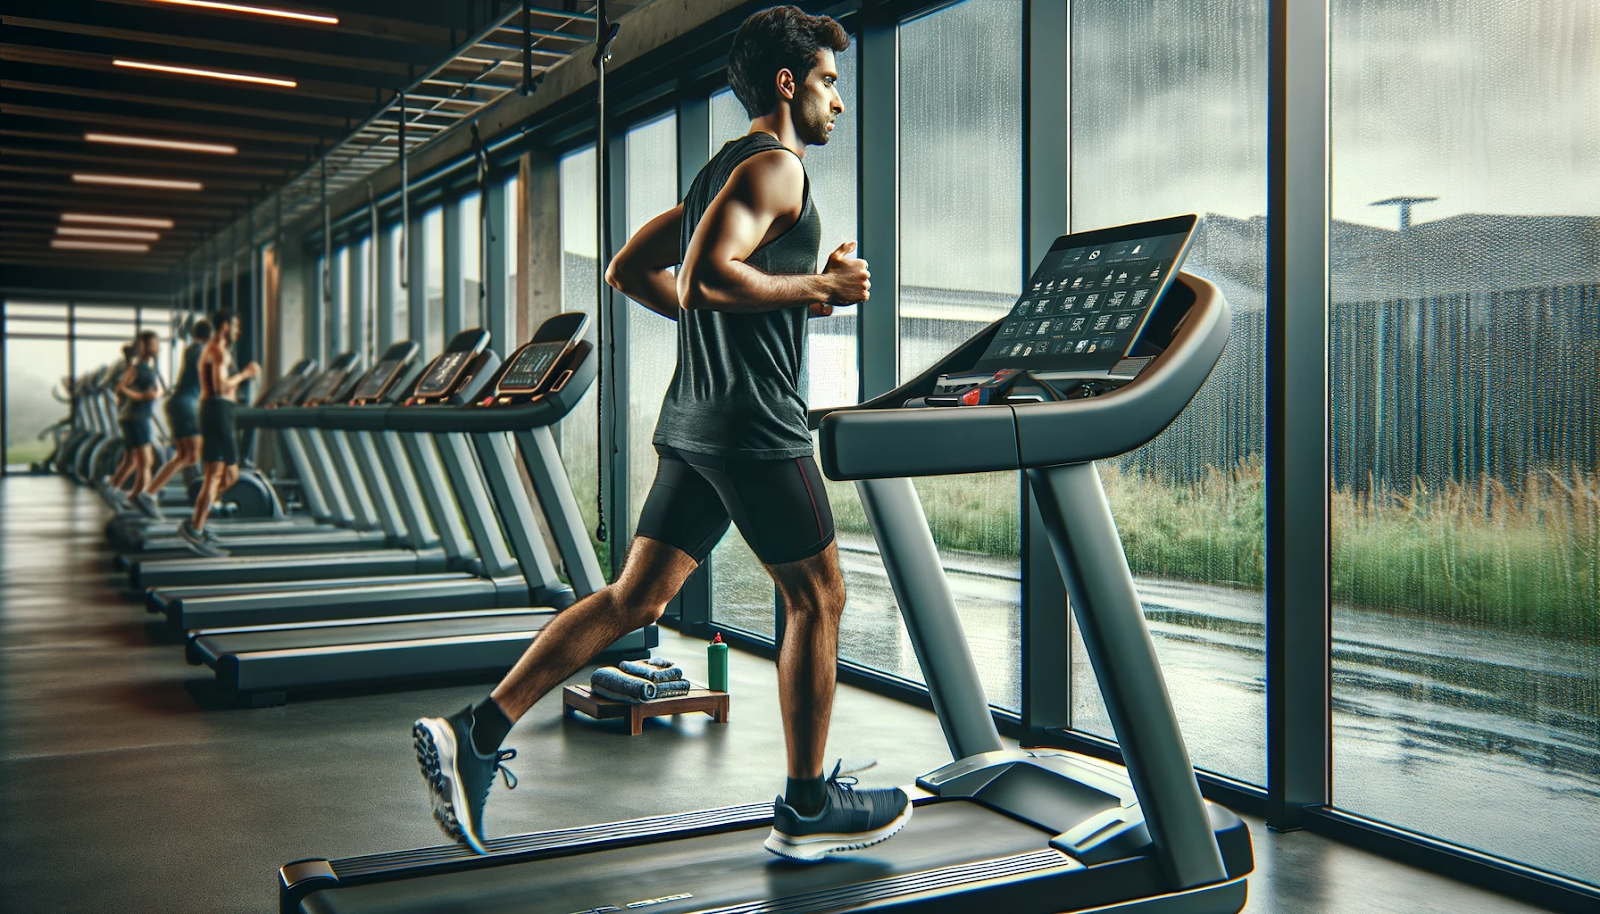 A male in athletic wear is focused and determined, running at a steady pace on the treadmill. The gym is modern and bright, with large windows showing a rainy day outside. The treadmill's digital display shows various settings, and there's a water bottle and a towel nearby.